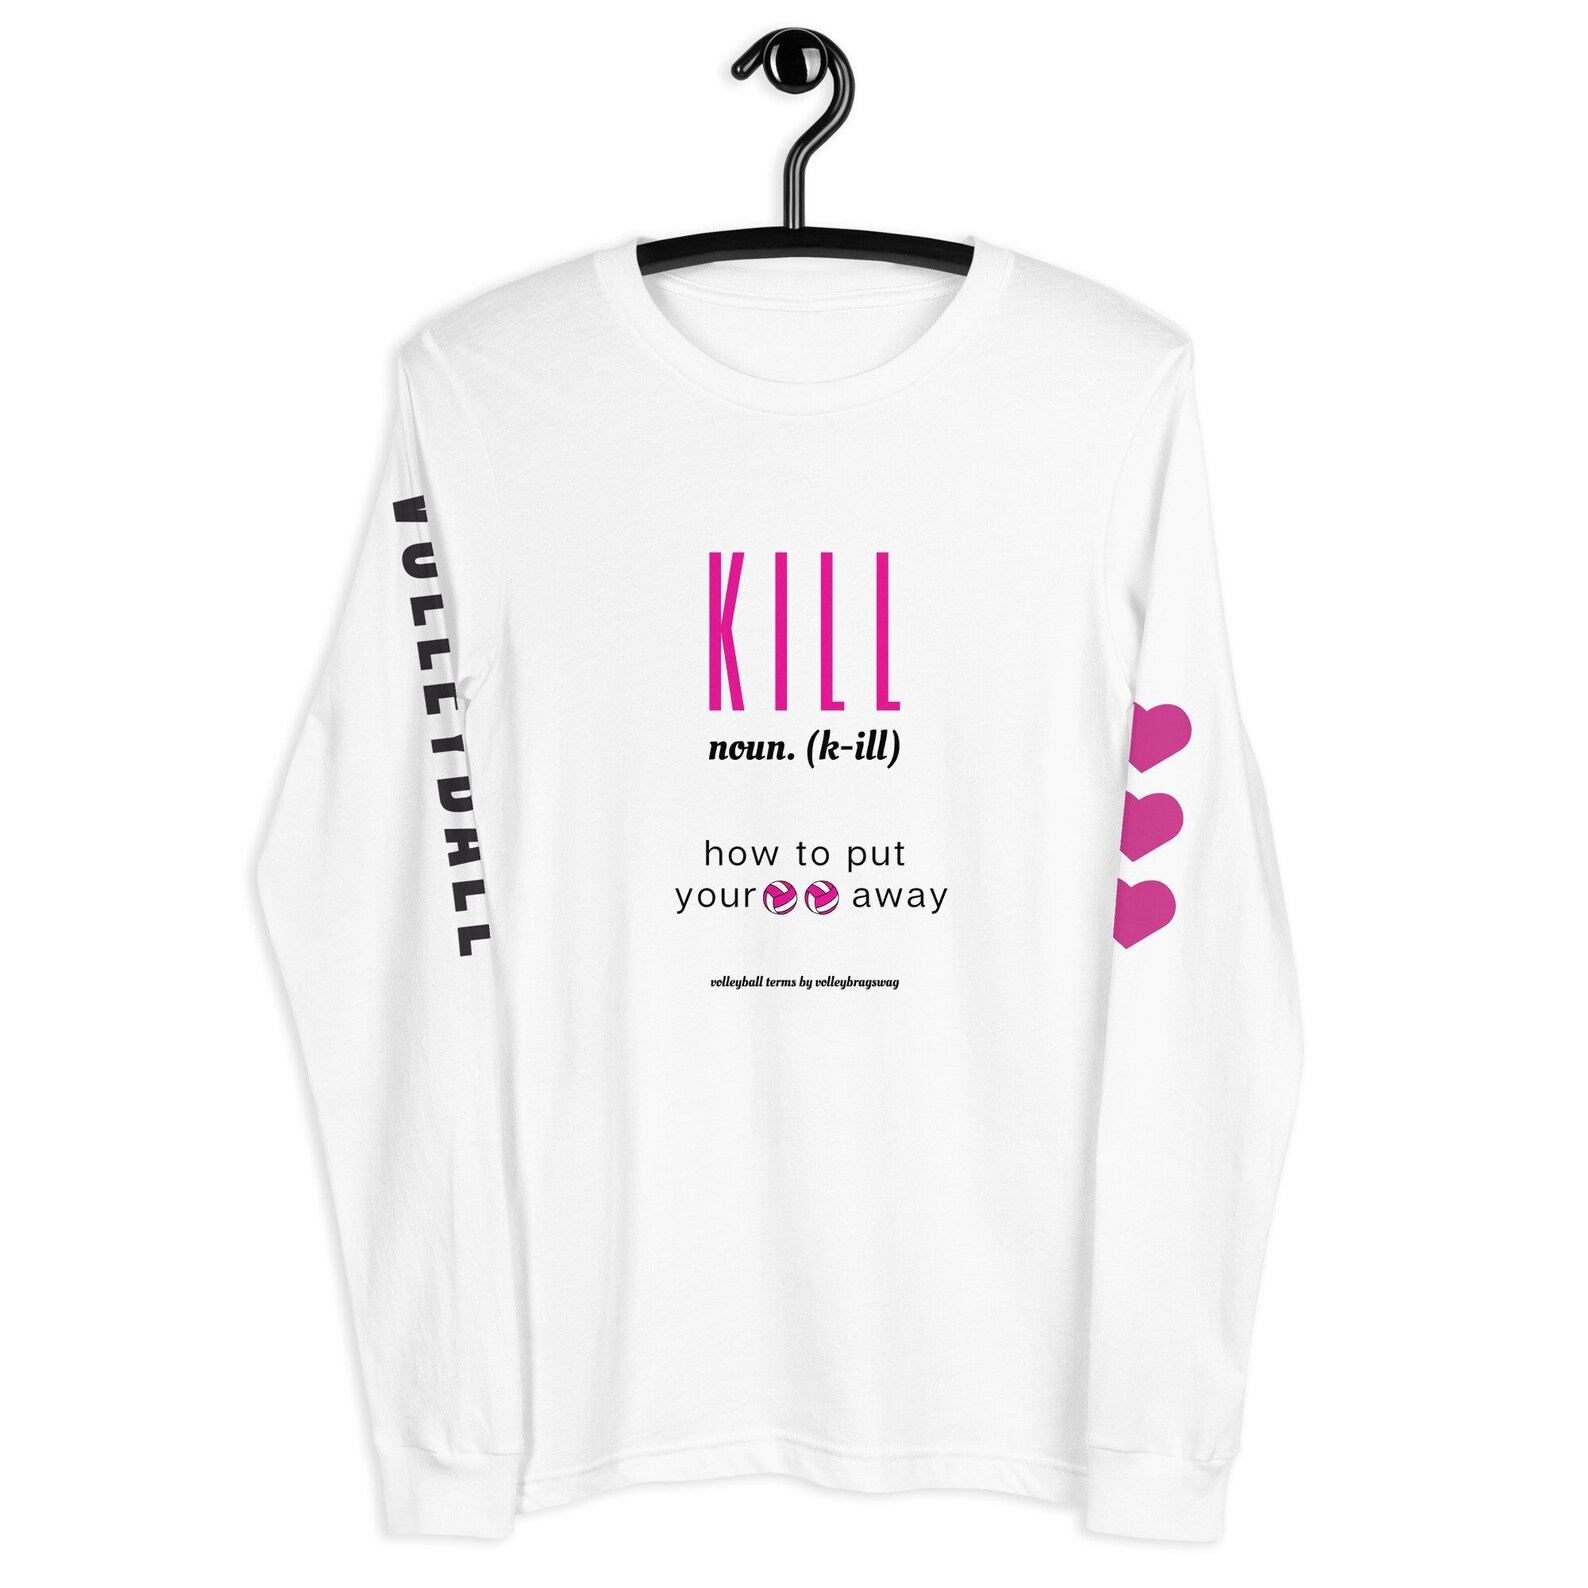 The unique text-based designs feature the slang term boldly displayed, followed by its part of speech in parentheses (noun/verb), then the hilarious definition, like: KILL how to put your balls away long sleeve shirt